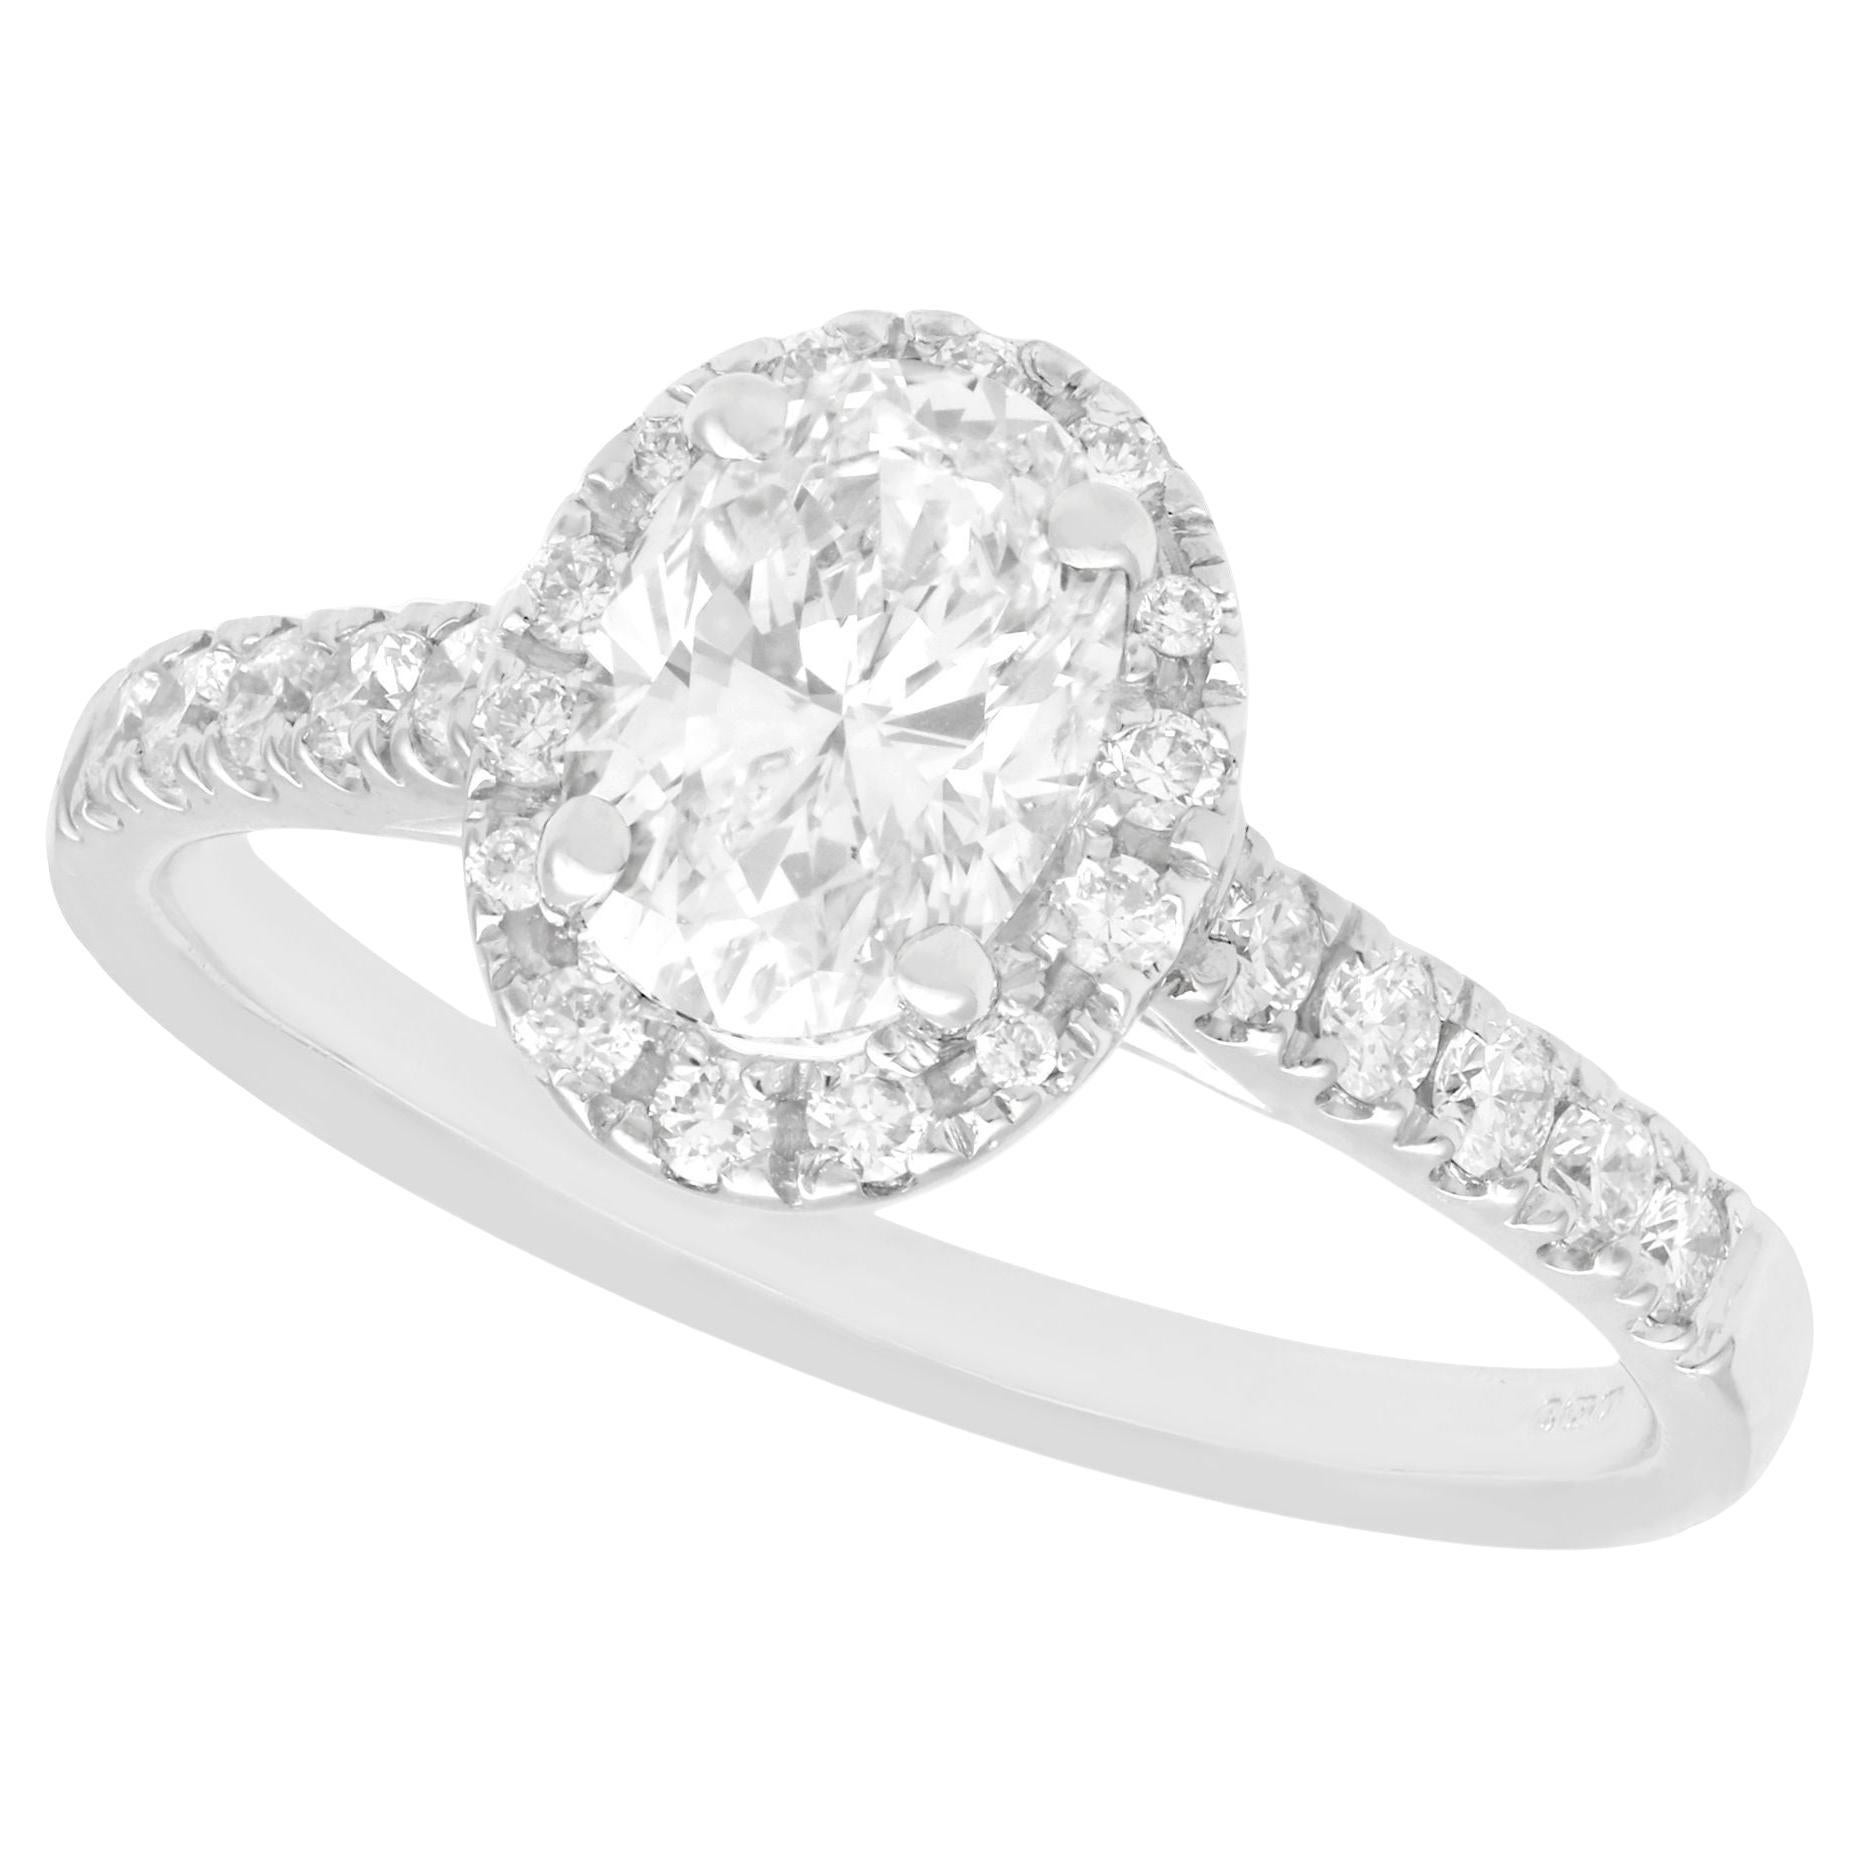 1.42 Carat Oval Cut Diamond and White Gold Engagement Ring